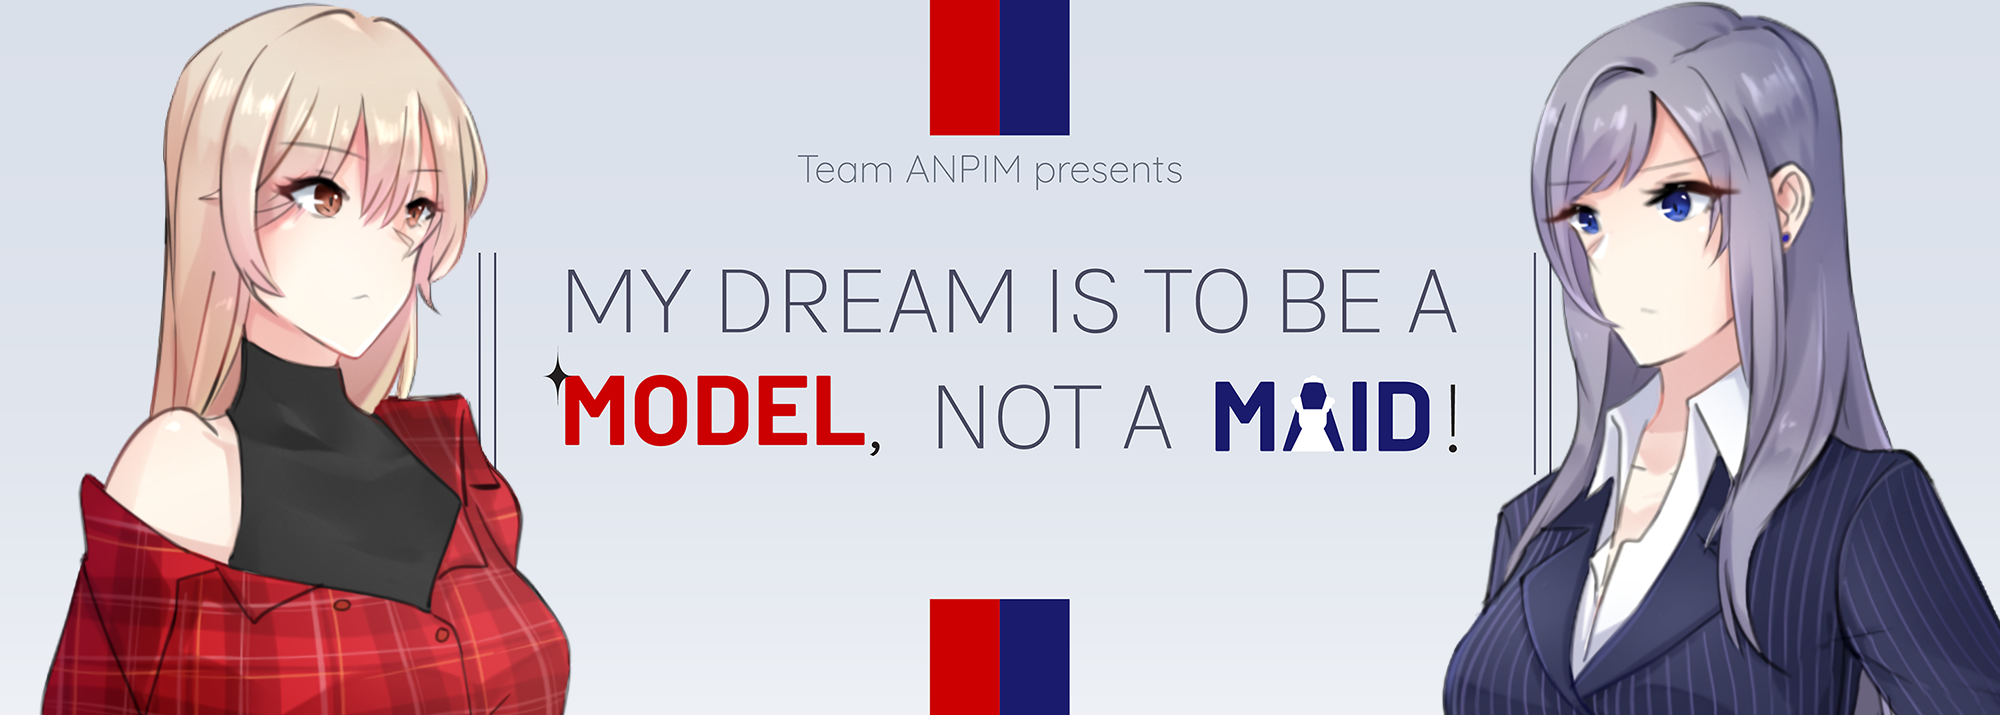 My Dream Is To Be A Model, Not a Maid!